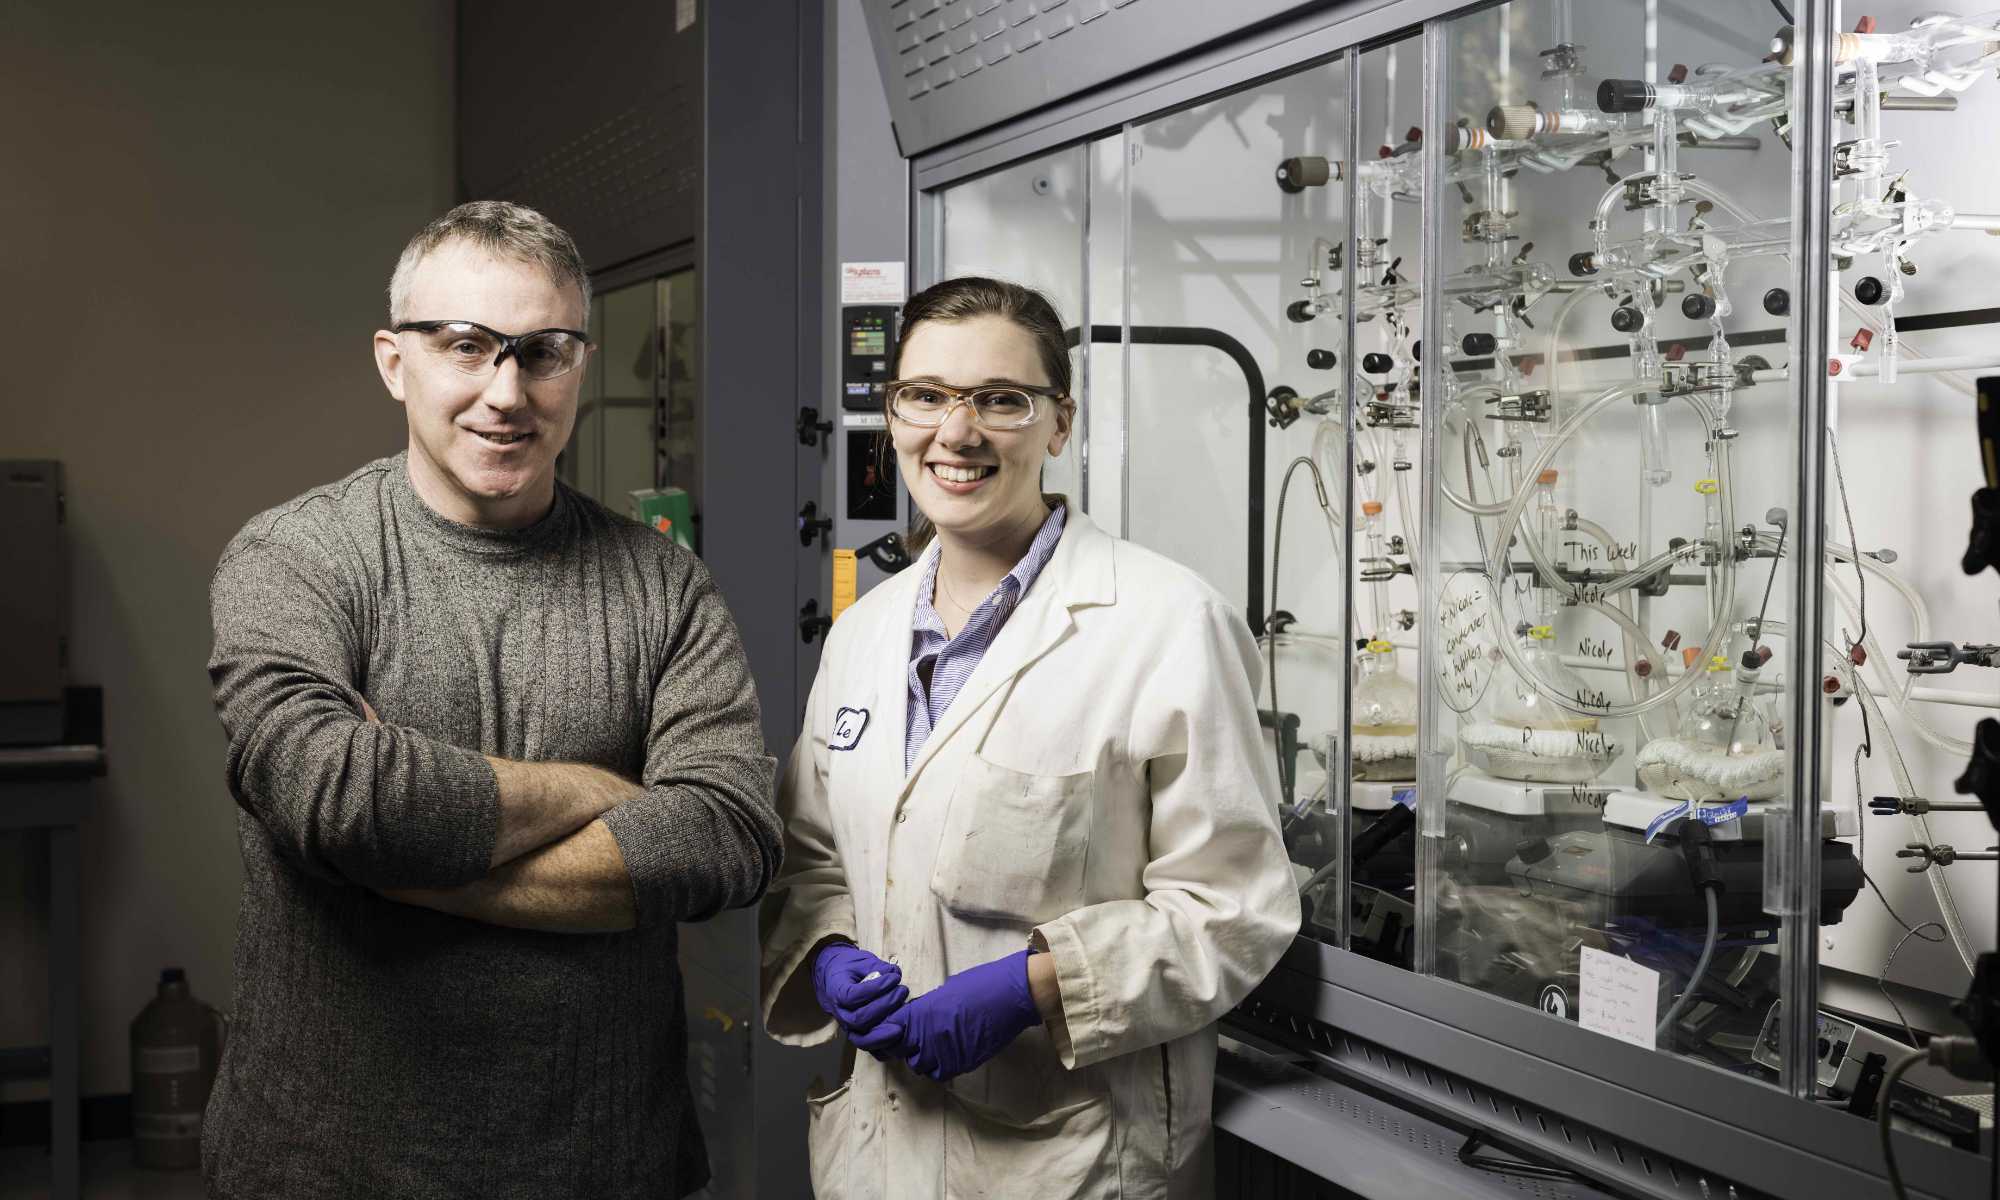 Todd Krauss and graduate student Leah Frenette in a chemistry lab.